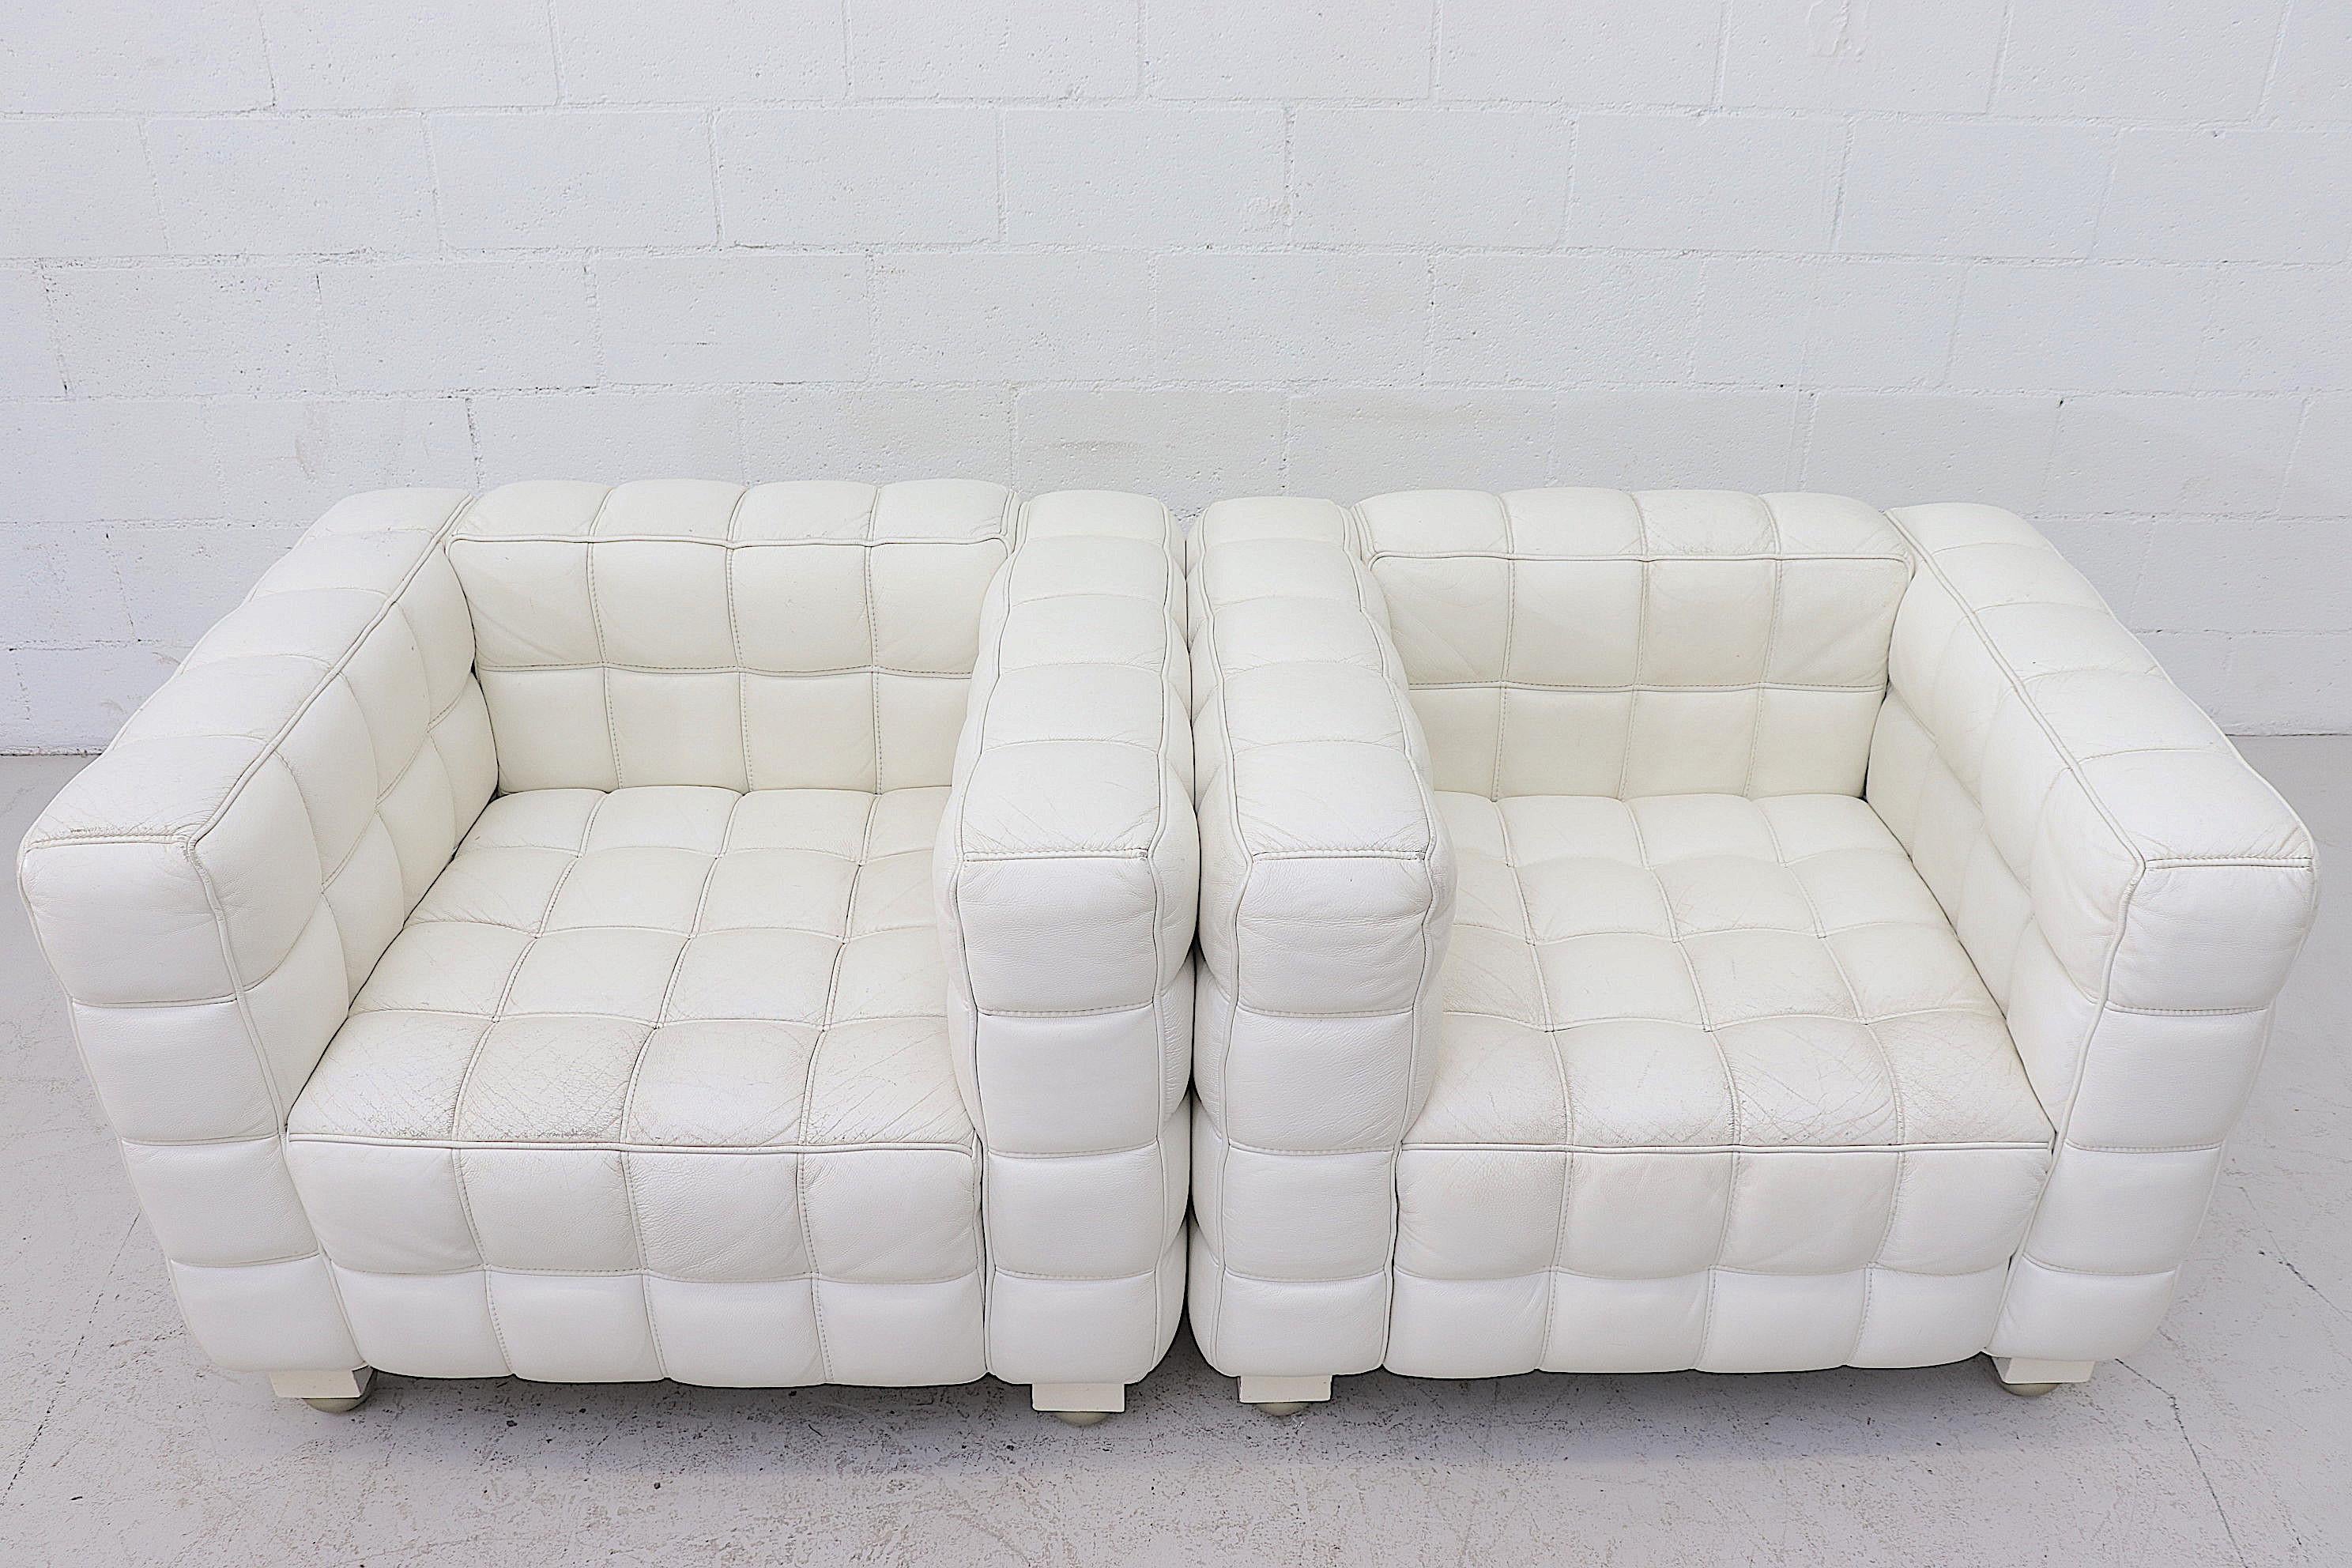 White Leather Kubus Style Lounge Chairs with Ottoman (Ende des 20. Jahrhunderts)